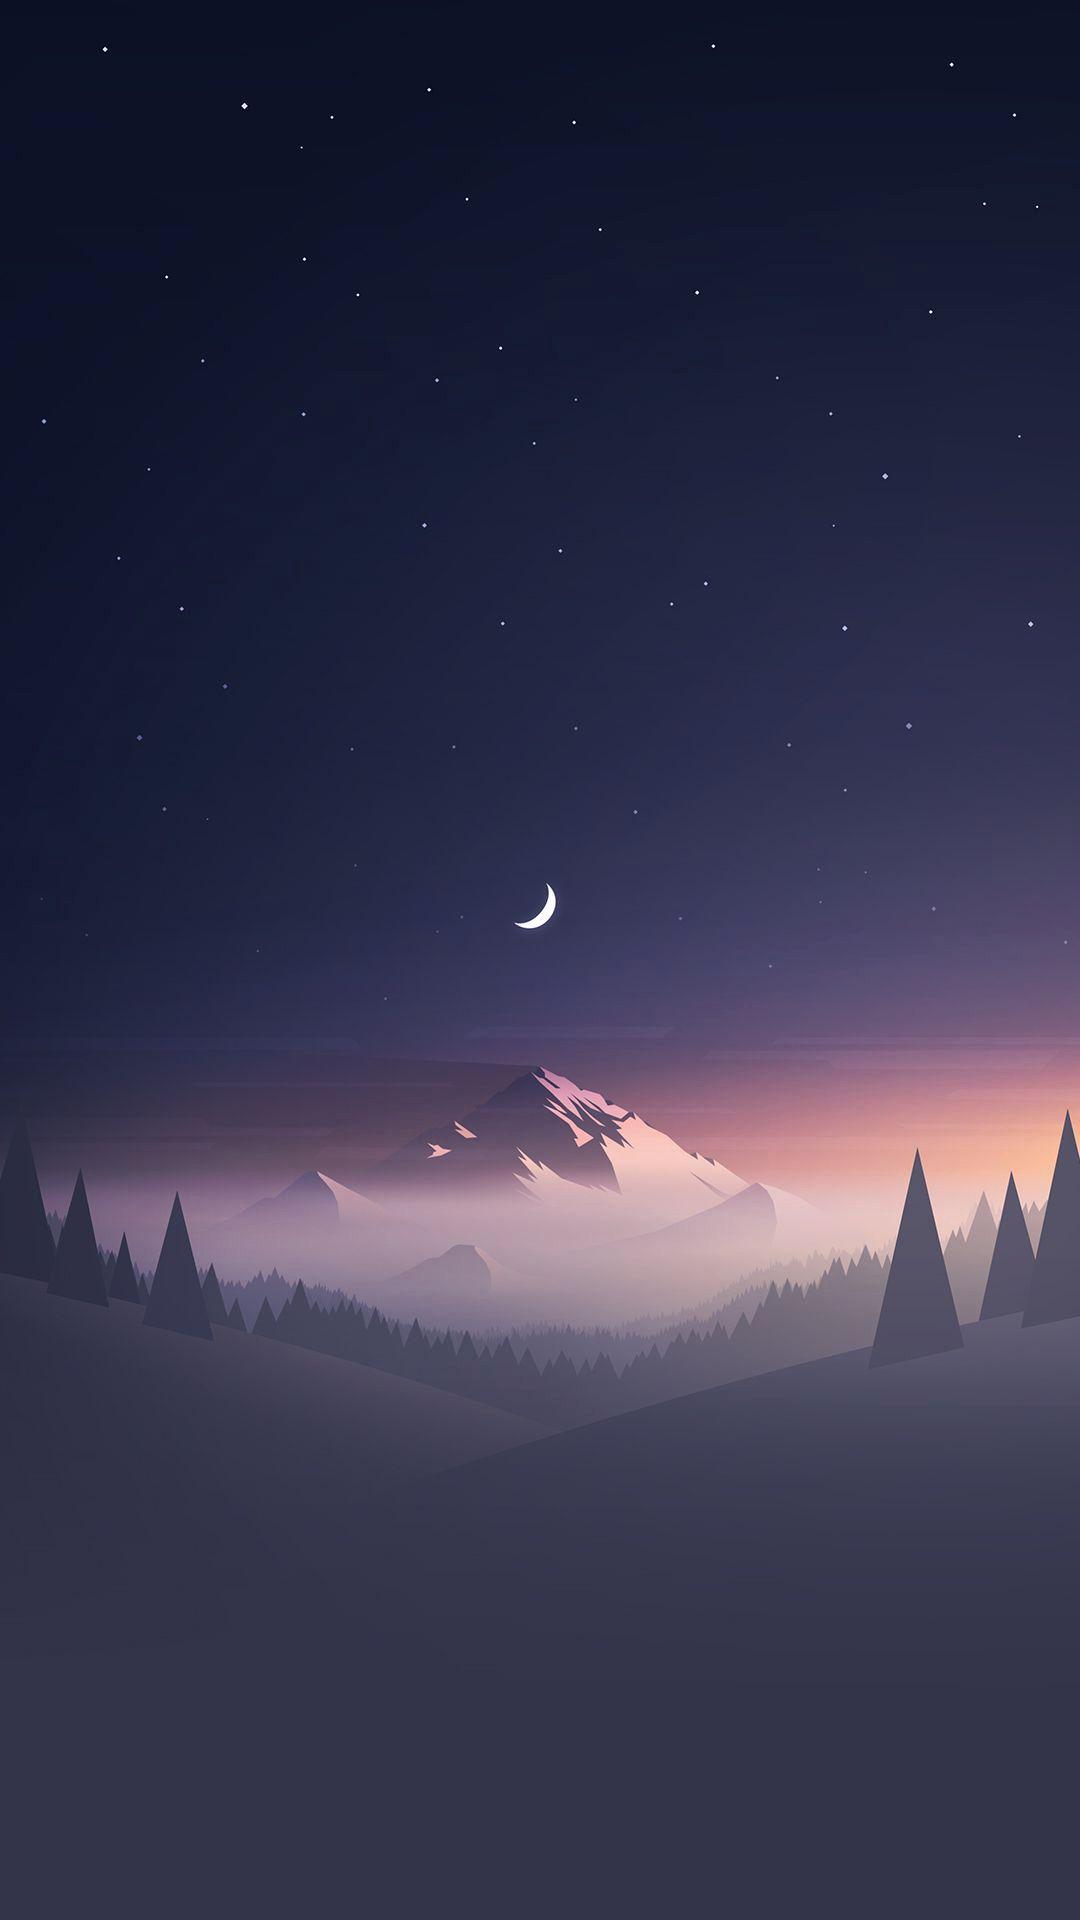 Iphone 8 Plus Wallpapers Zip Best Of Stars And Moon Winter Mountain